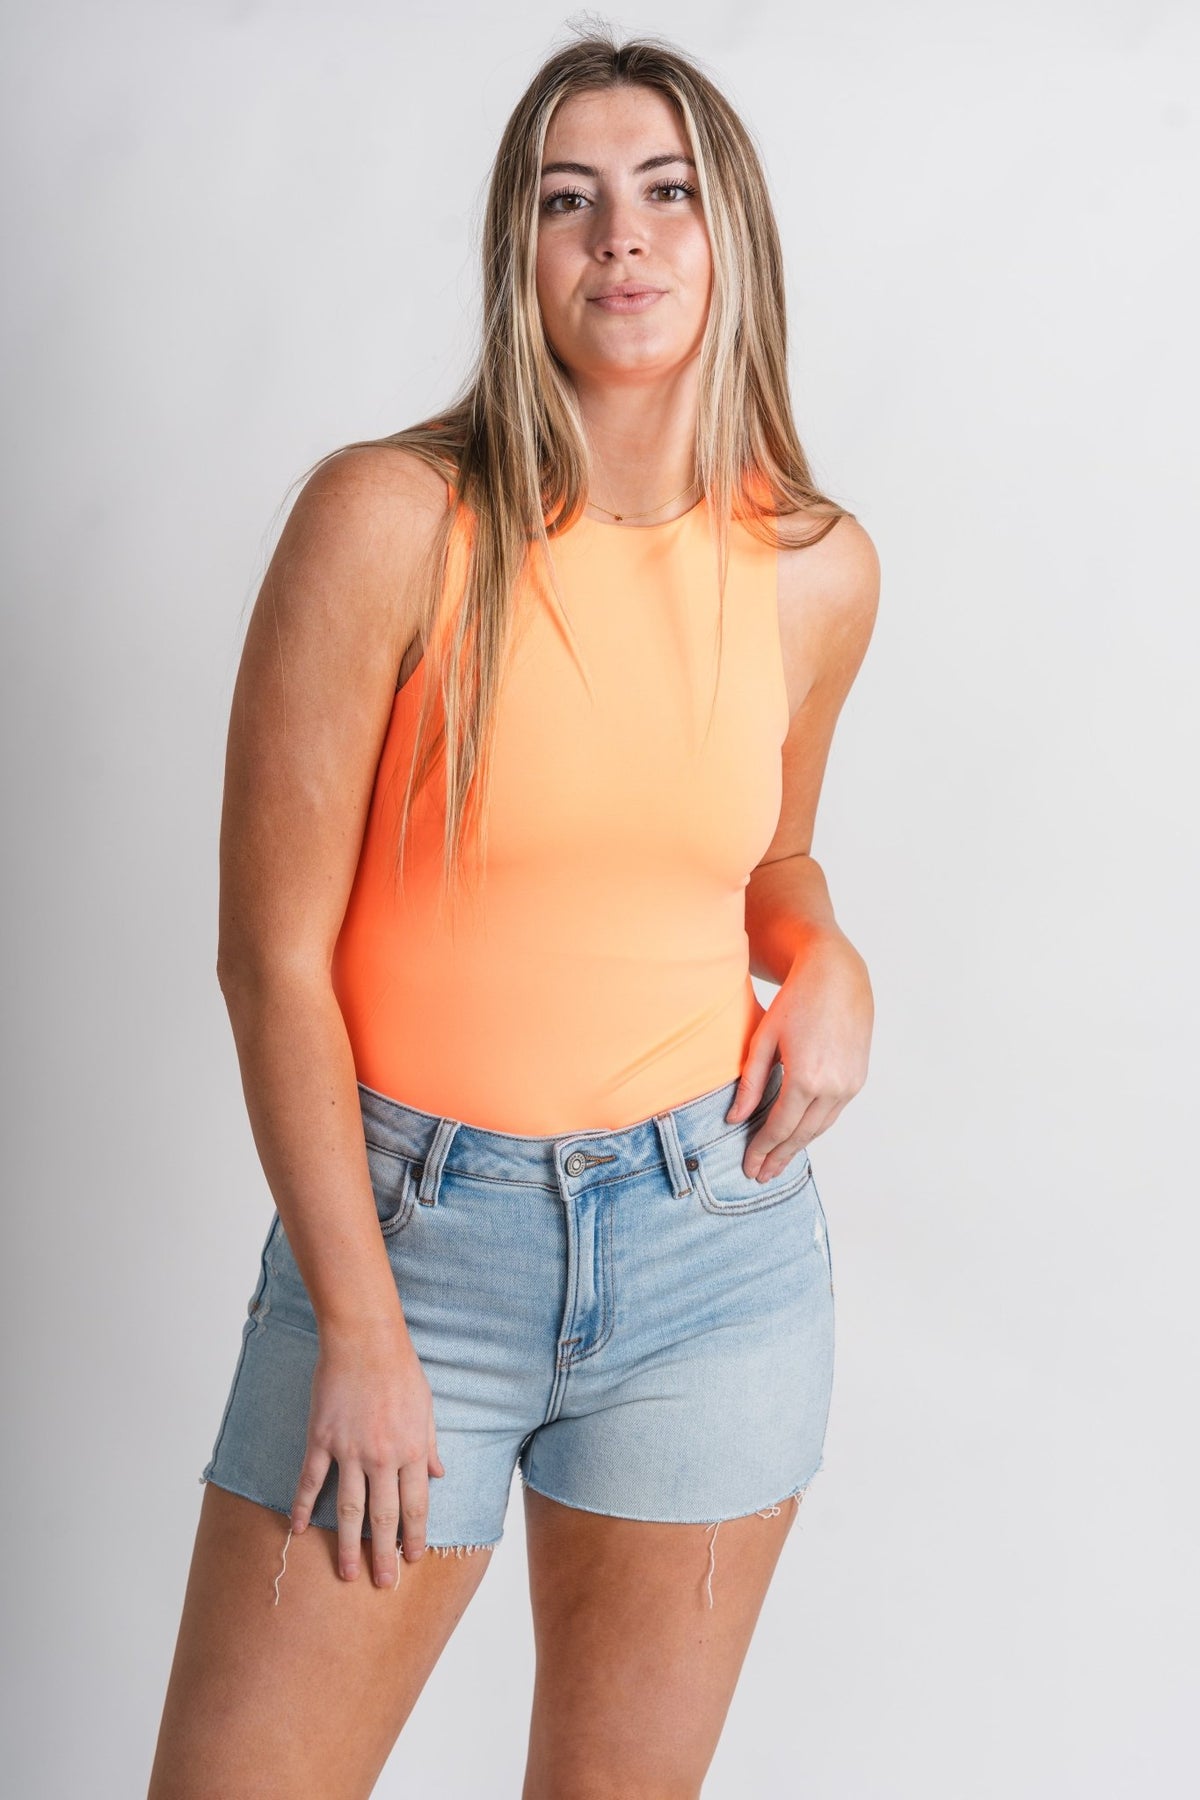 Sleeveless smooth soft bodysuit neon coral - Trendy bodysuit - Cute Vacation Collection at Lush Fashion Lounge Boutique in Oklahoma City